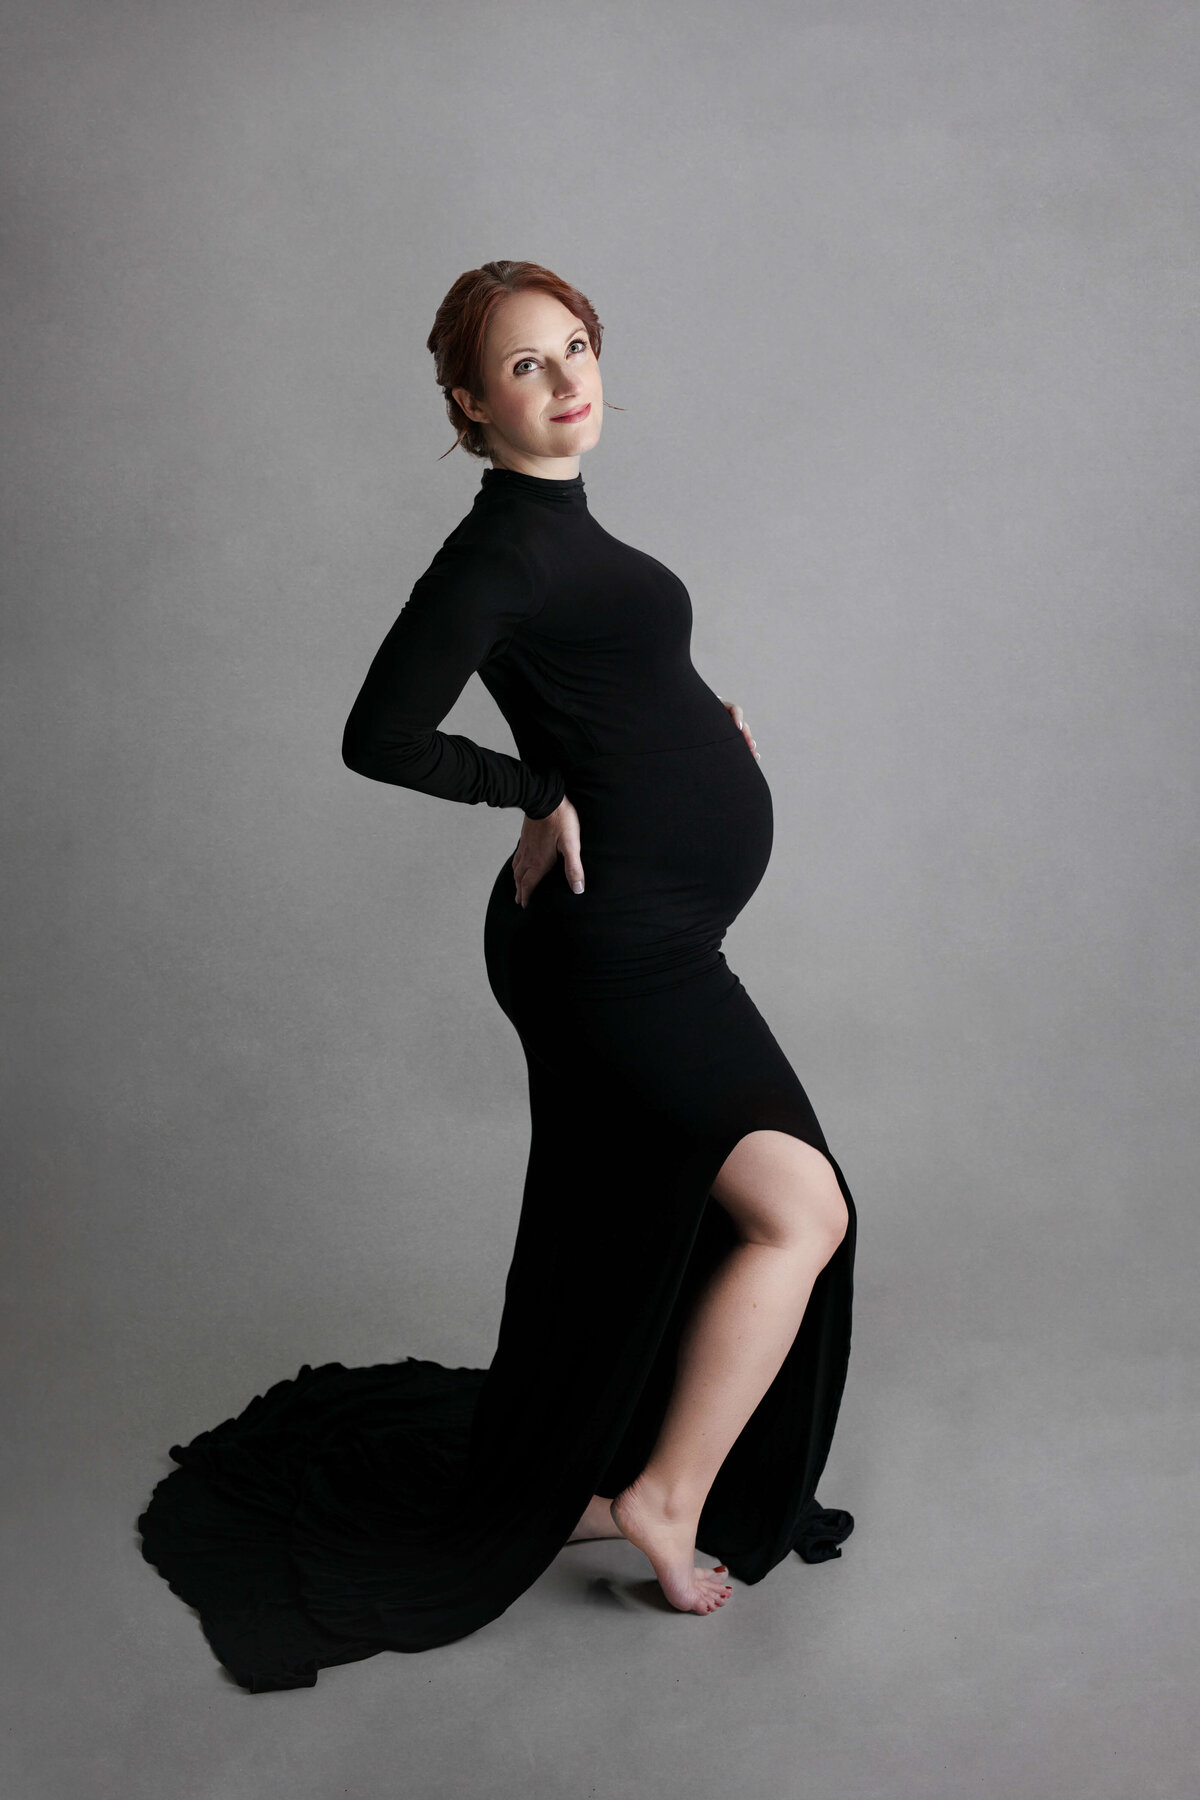 pregnant woman looking up holding her back in a black maternity gown in a photography studio